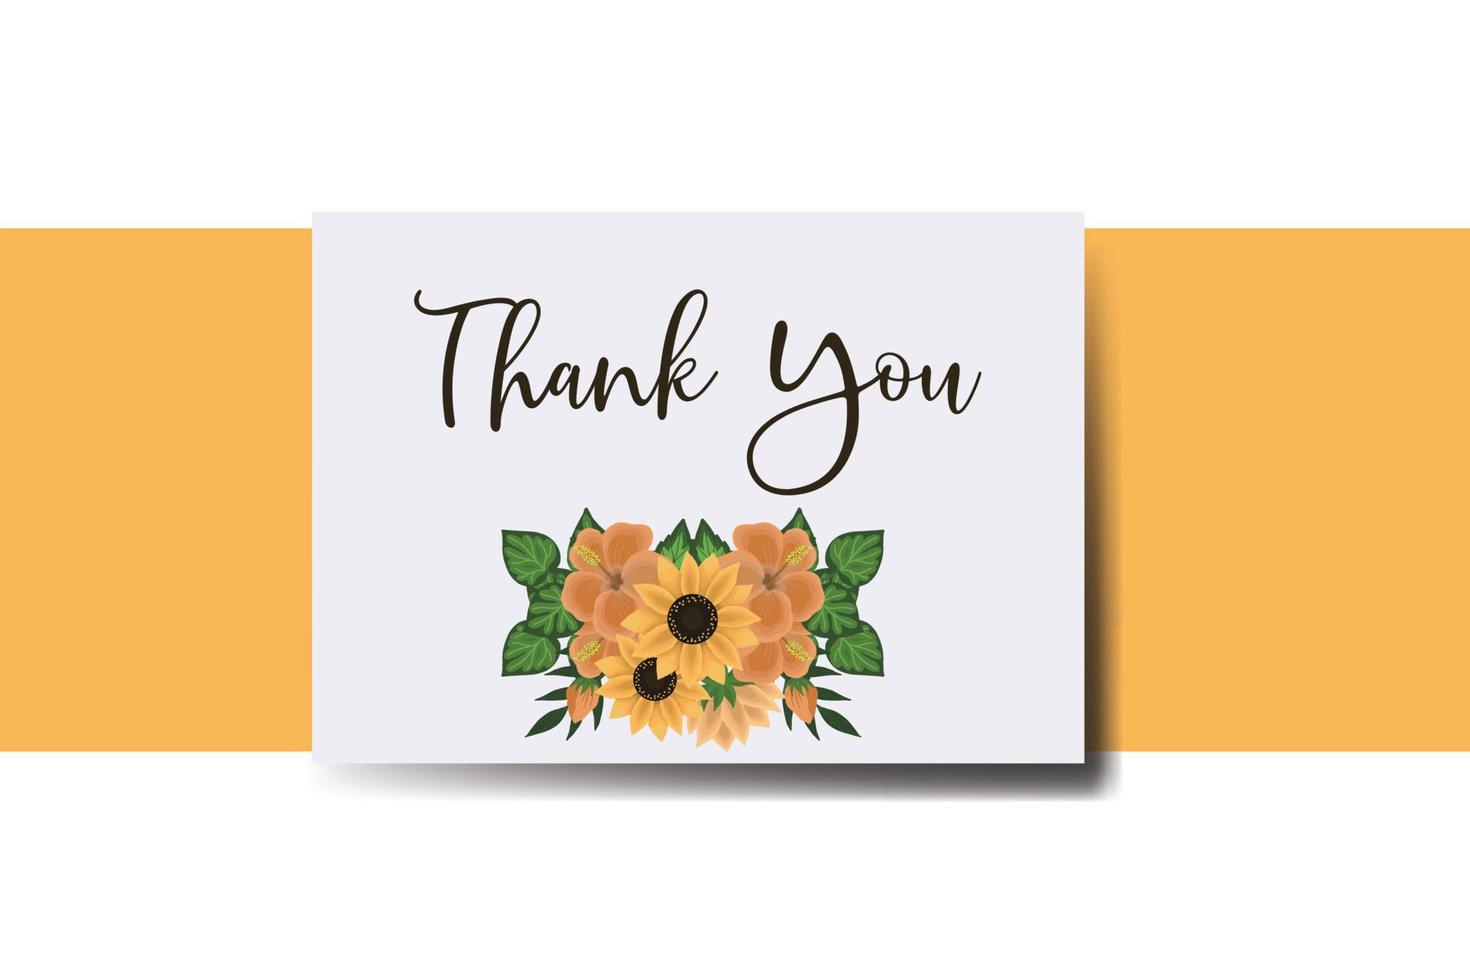 Thank you card Greeting Card Sunflower Design Template vector